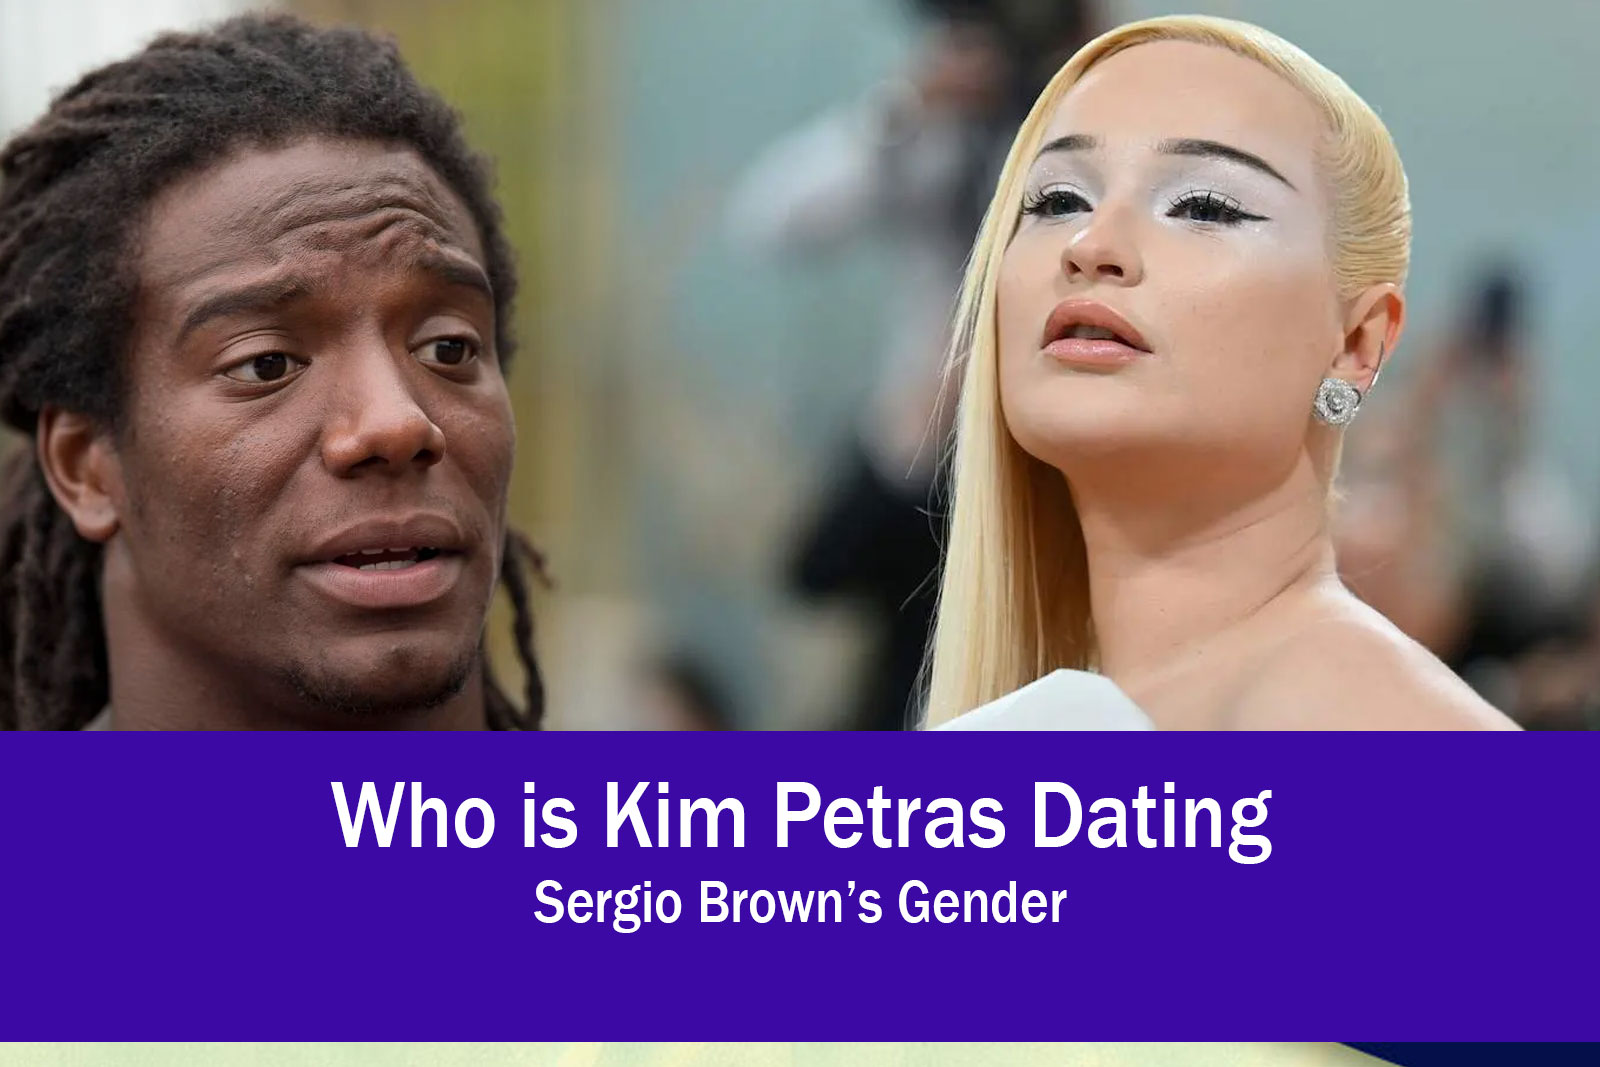 Who is Kim Petras Dating